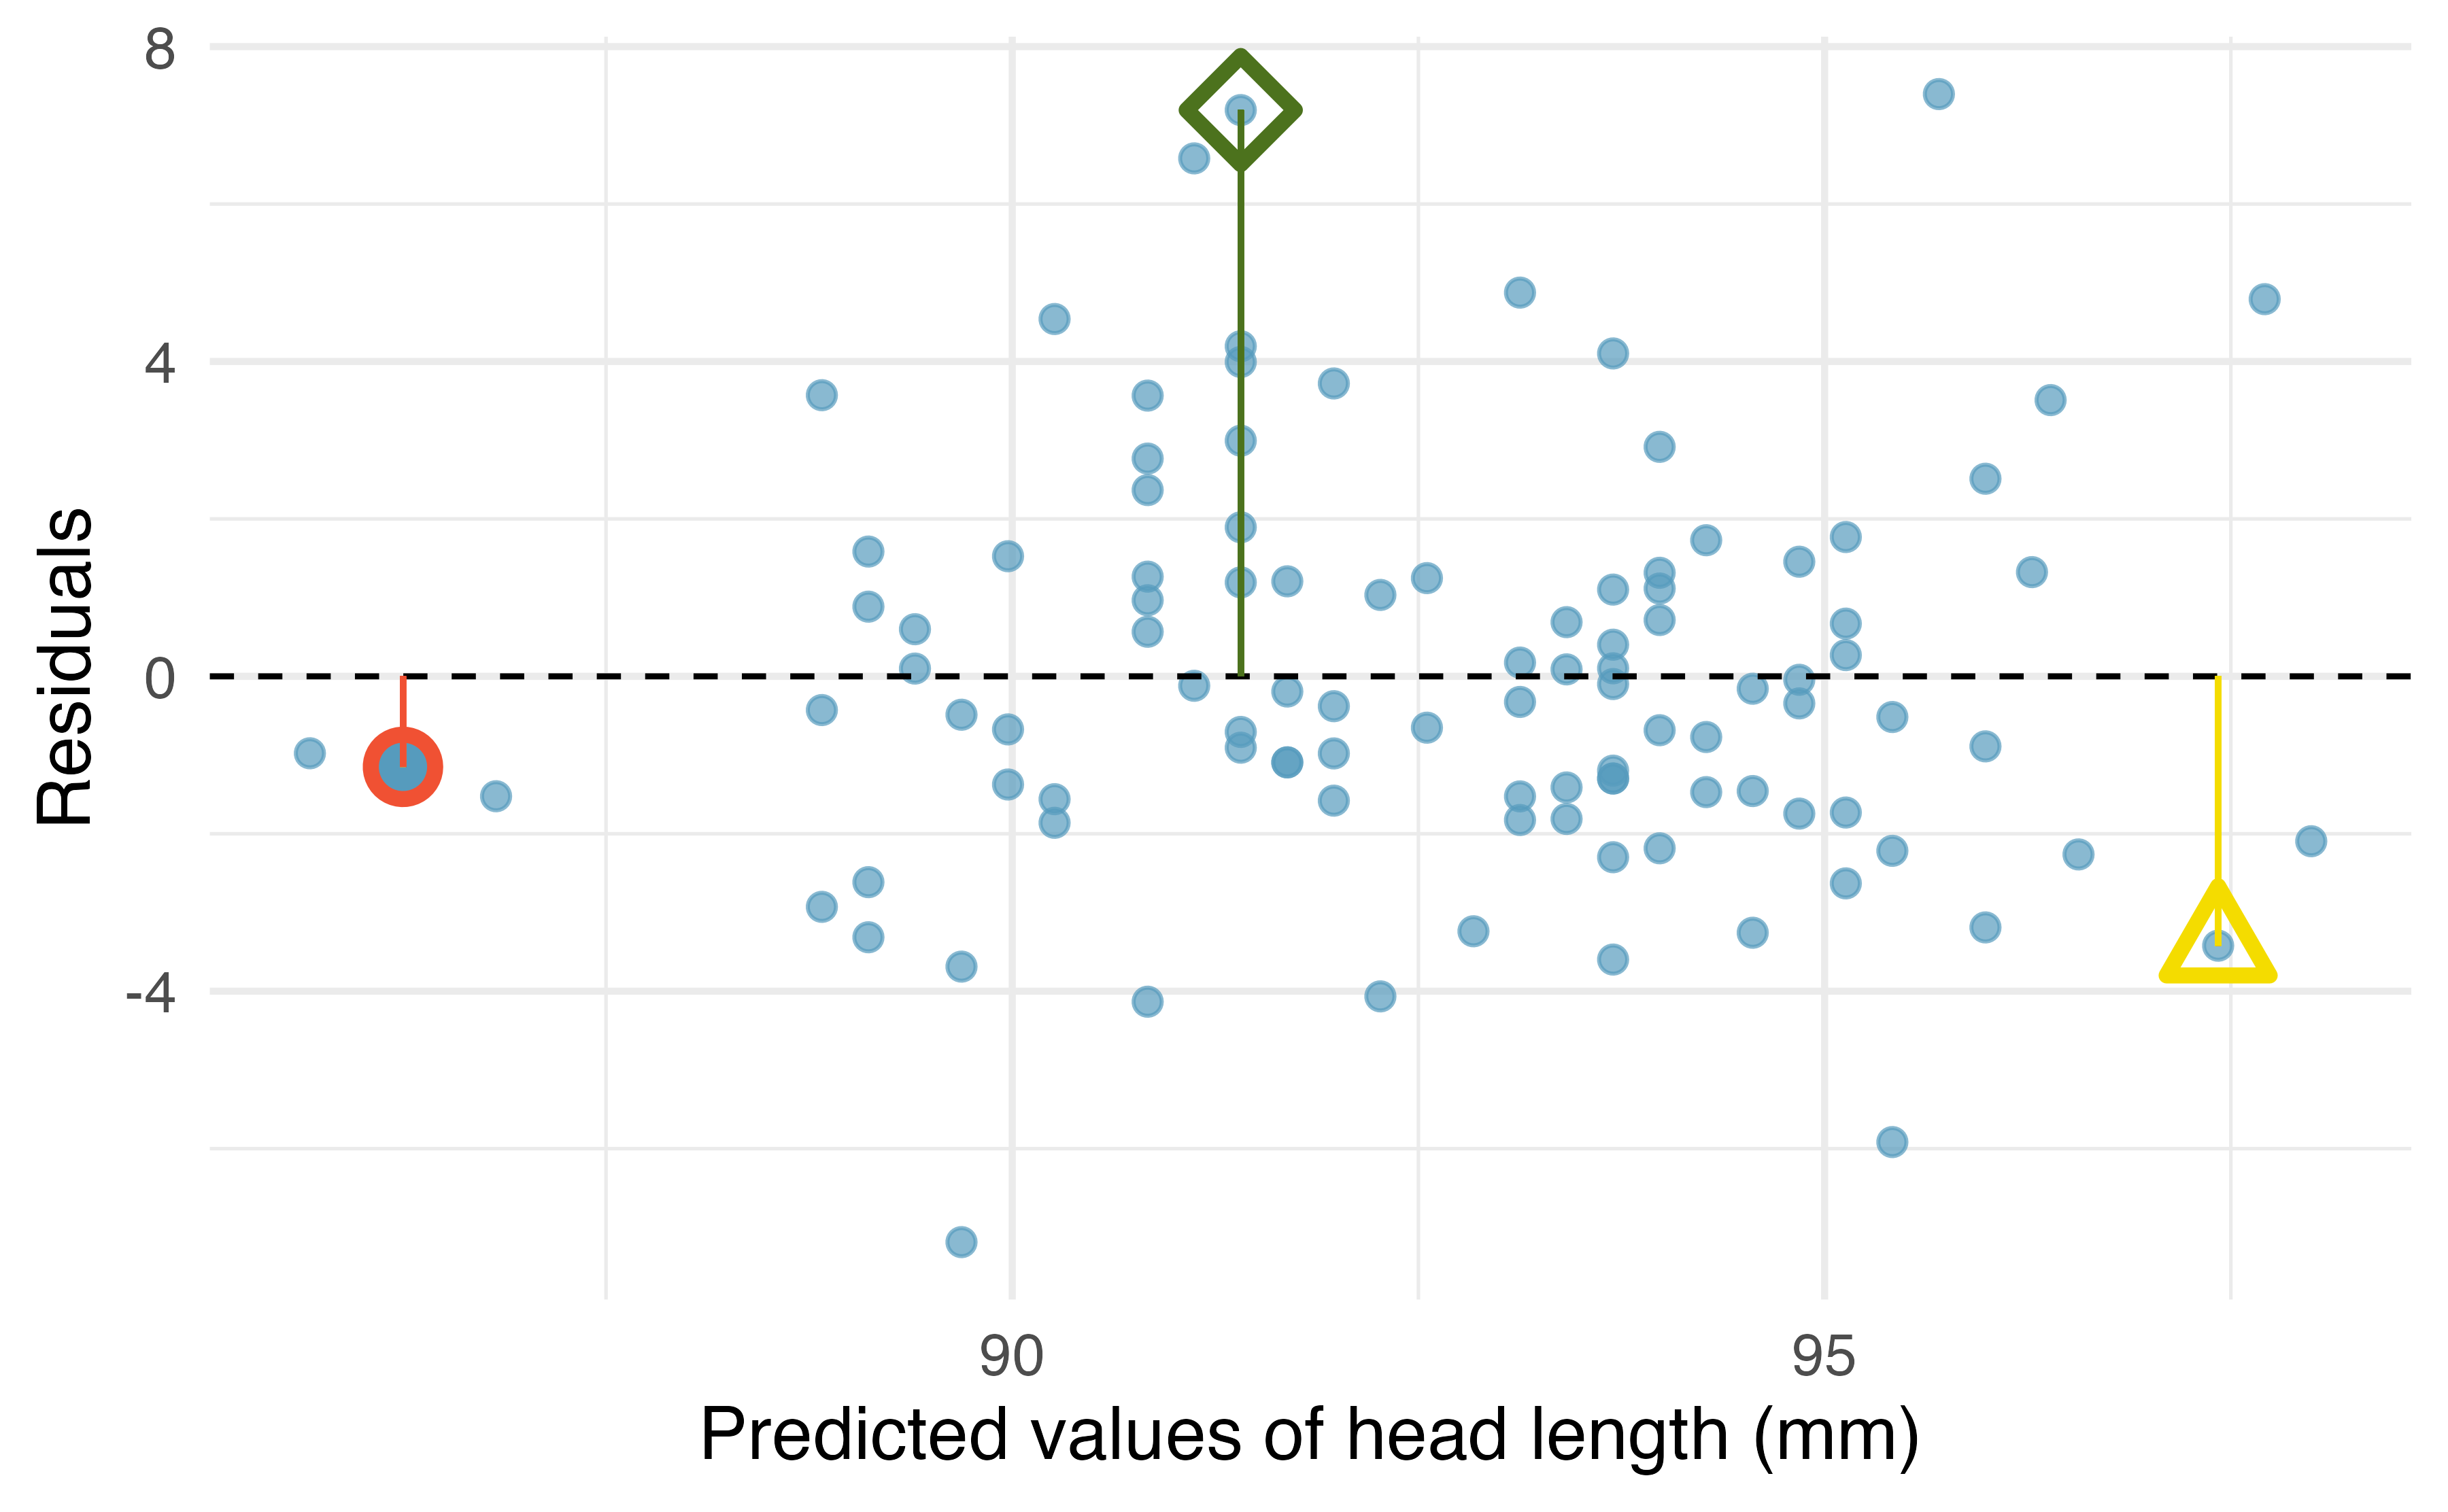 Residual plot for the model predicting head length from total length for brushtail possums.